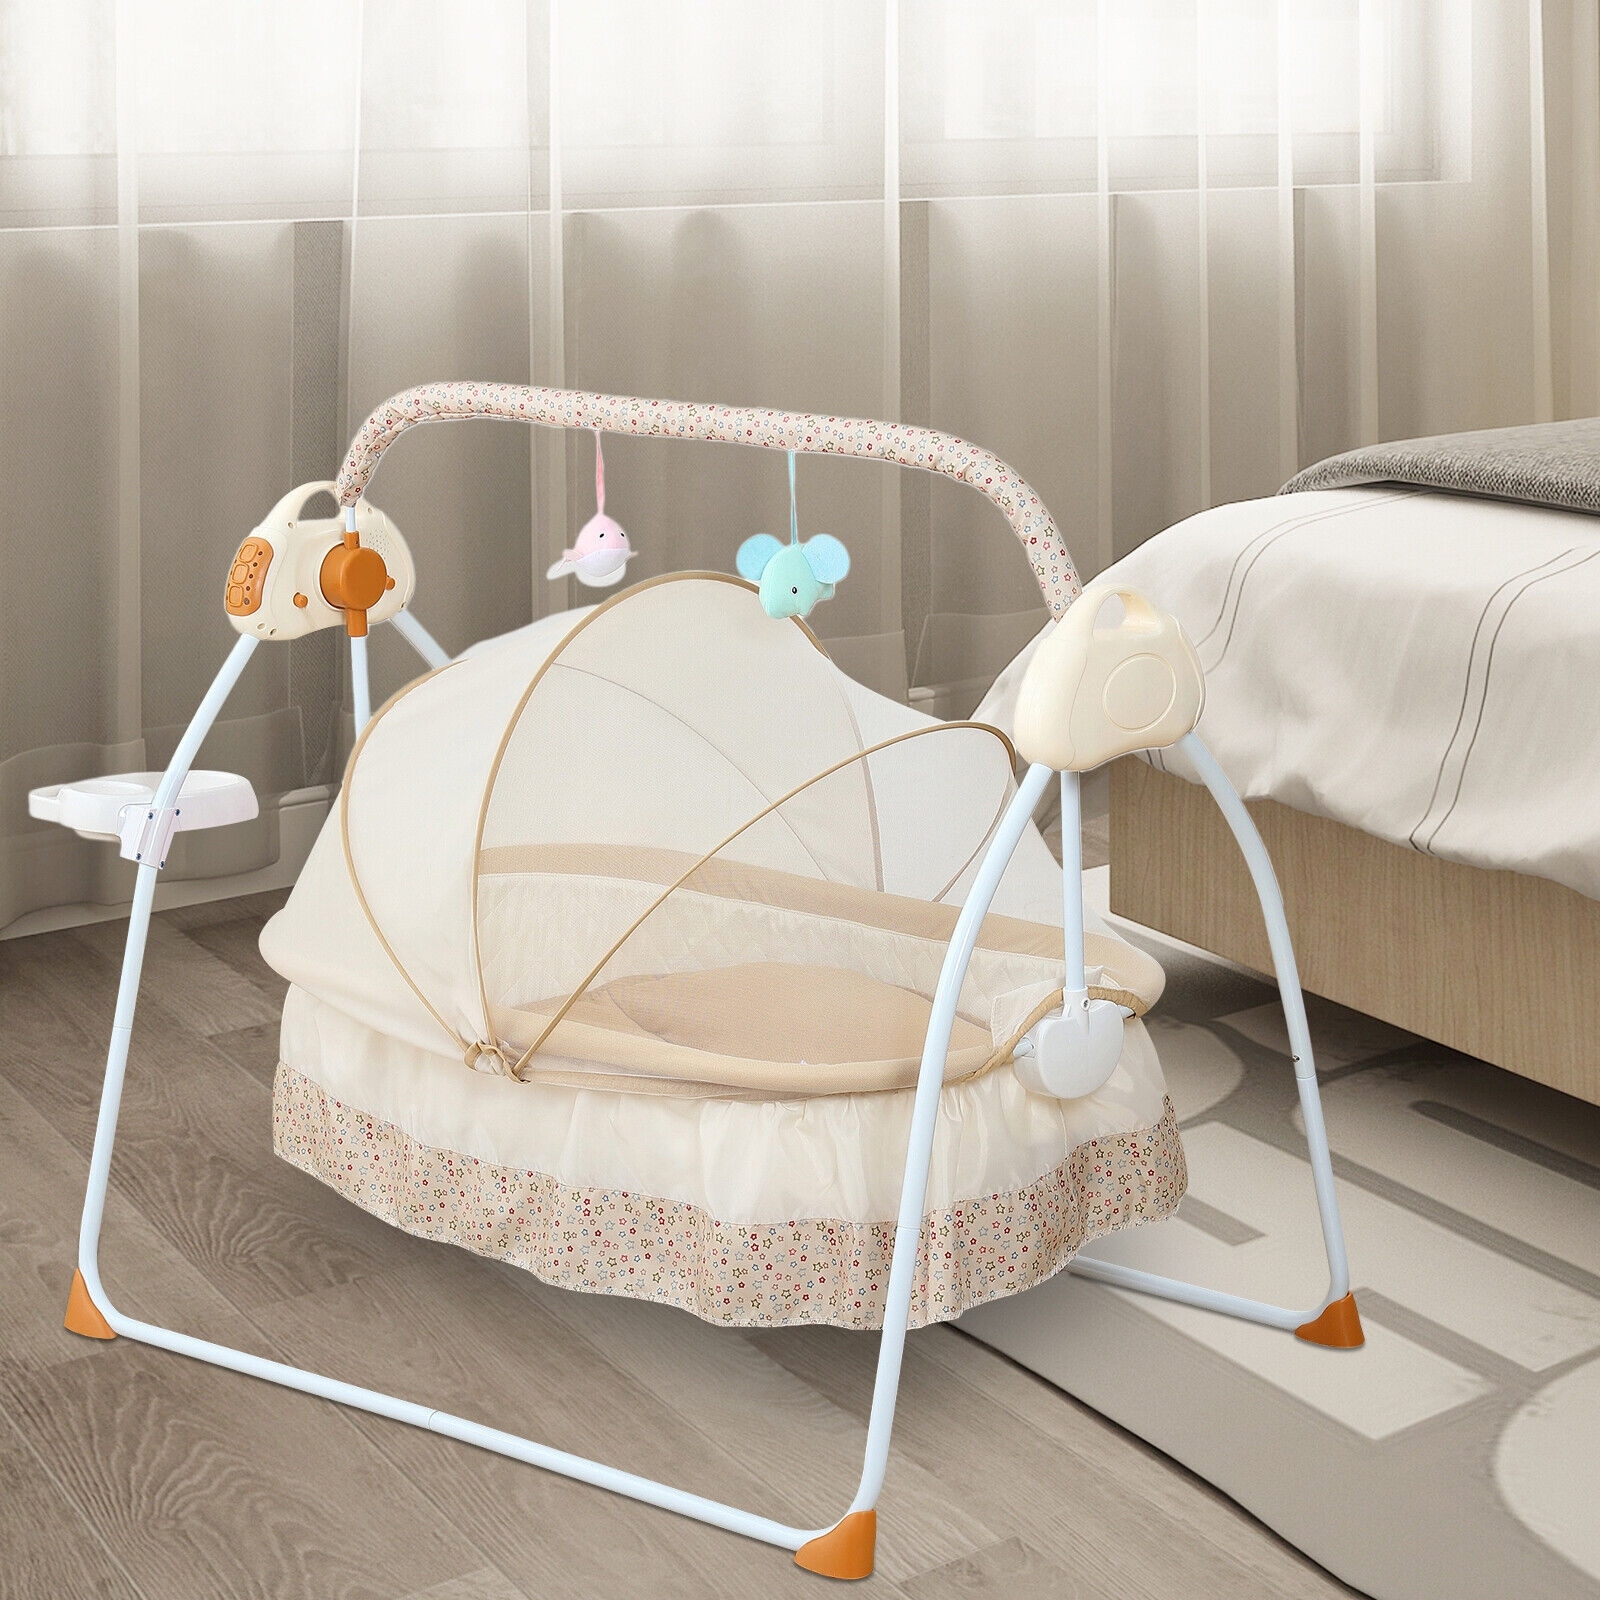 Portable Baby Moses Basket for Carrier Cotton Rope Woven Crib Newborn  Sleeping Bed Cradle Bassinet Nursery Decor